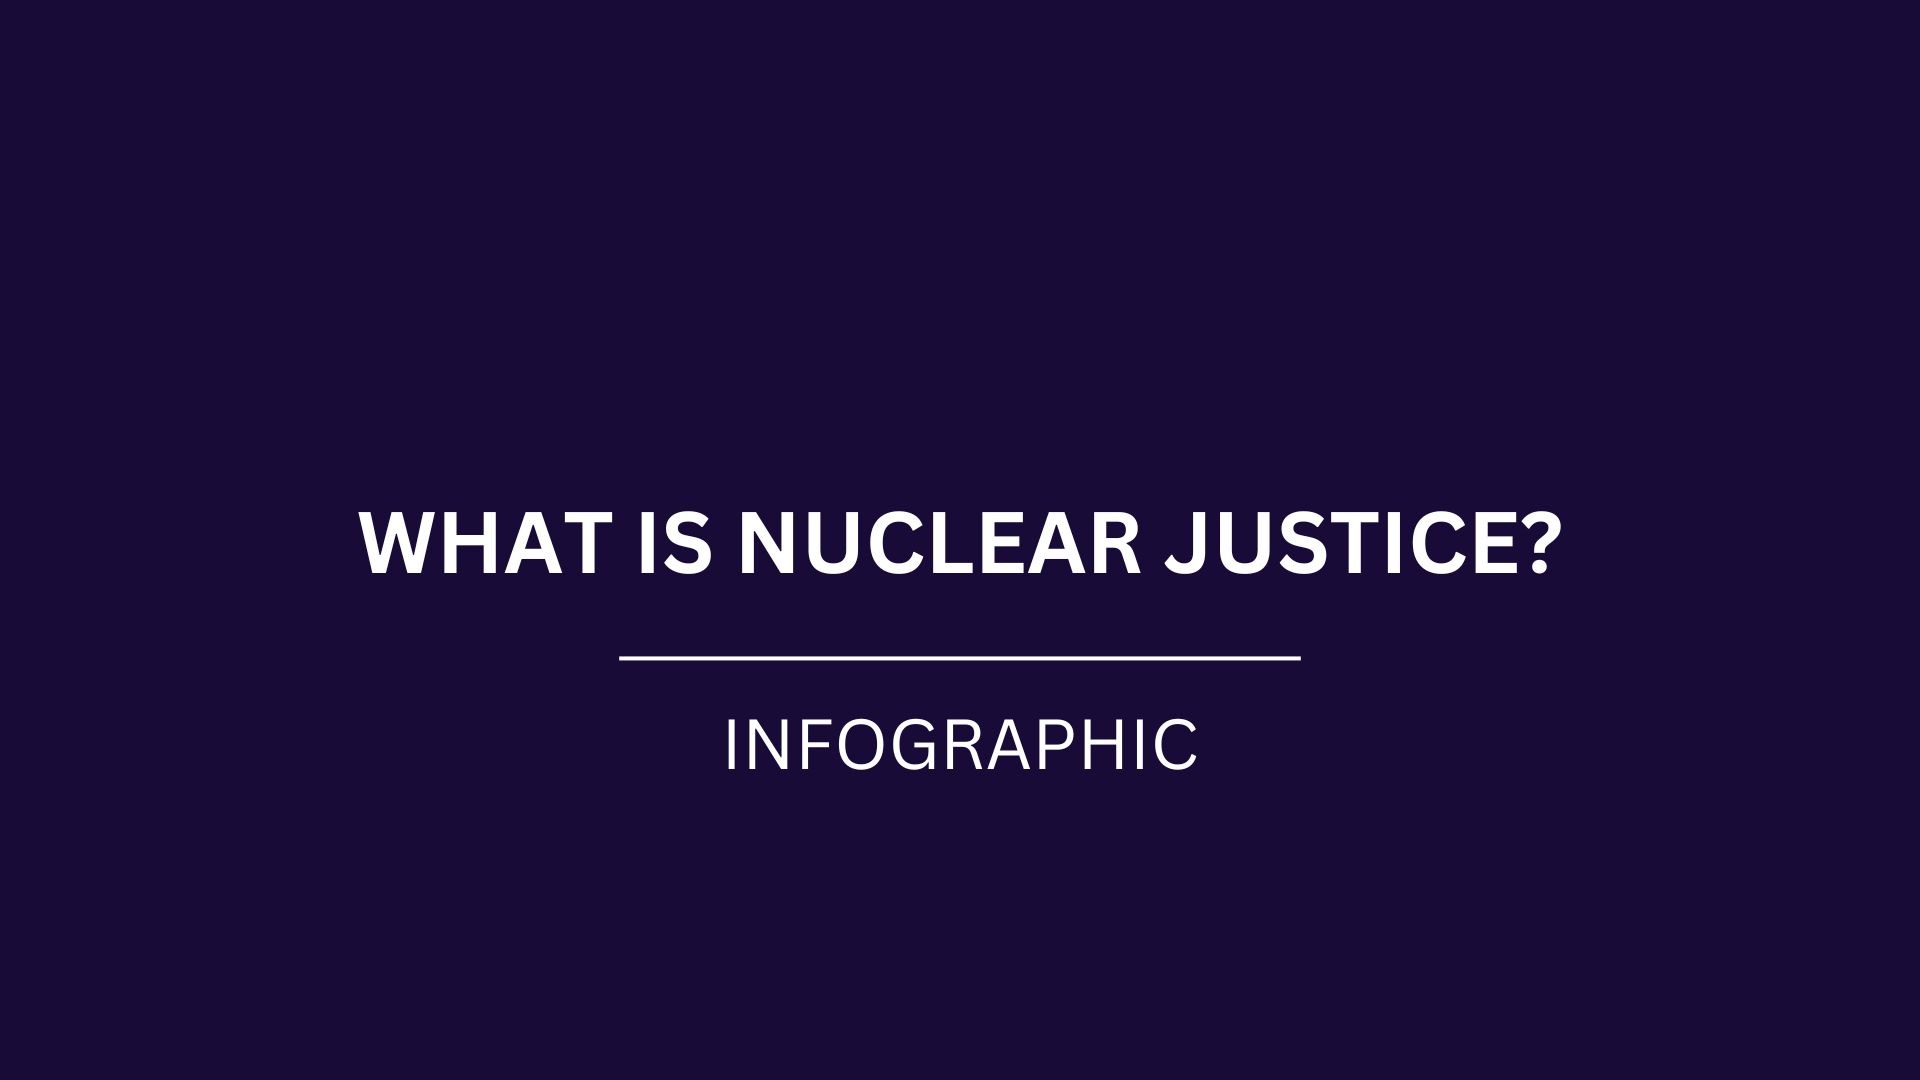 [Infographic] What is Nuclear Justice?